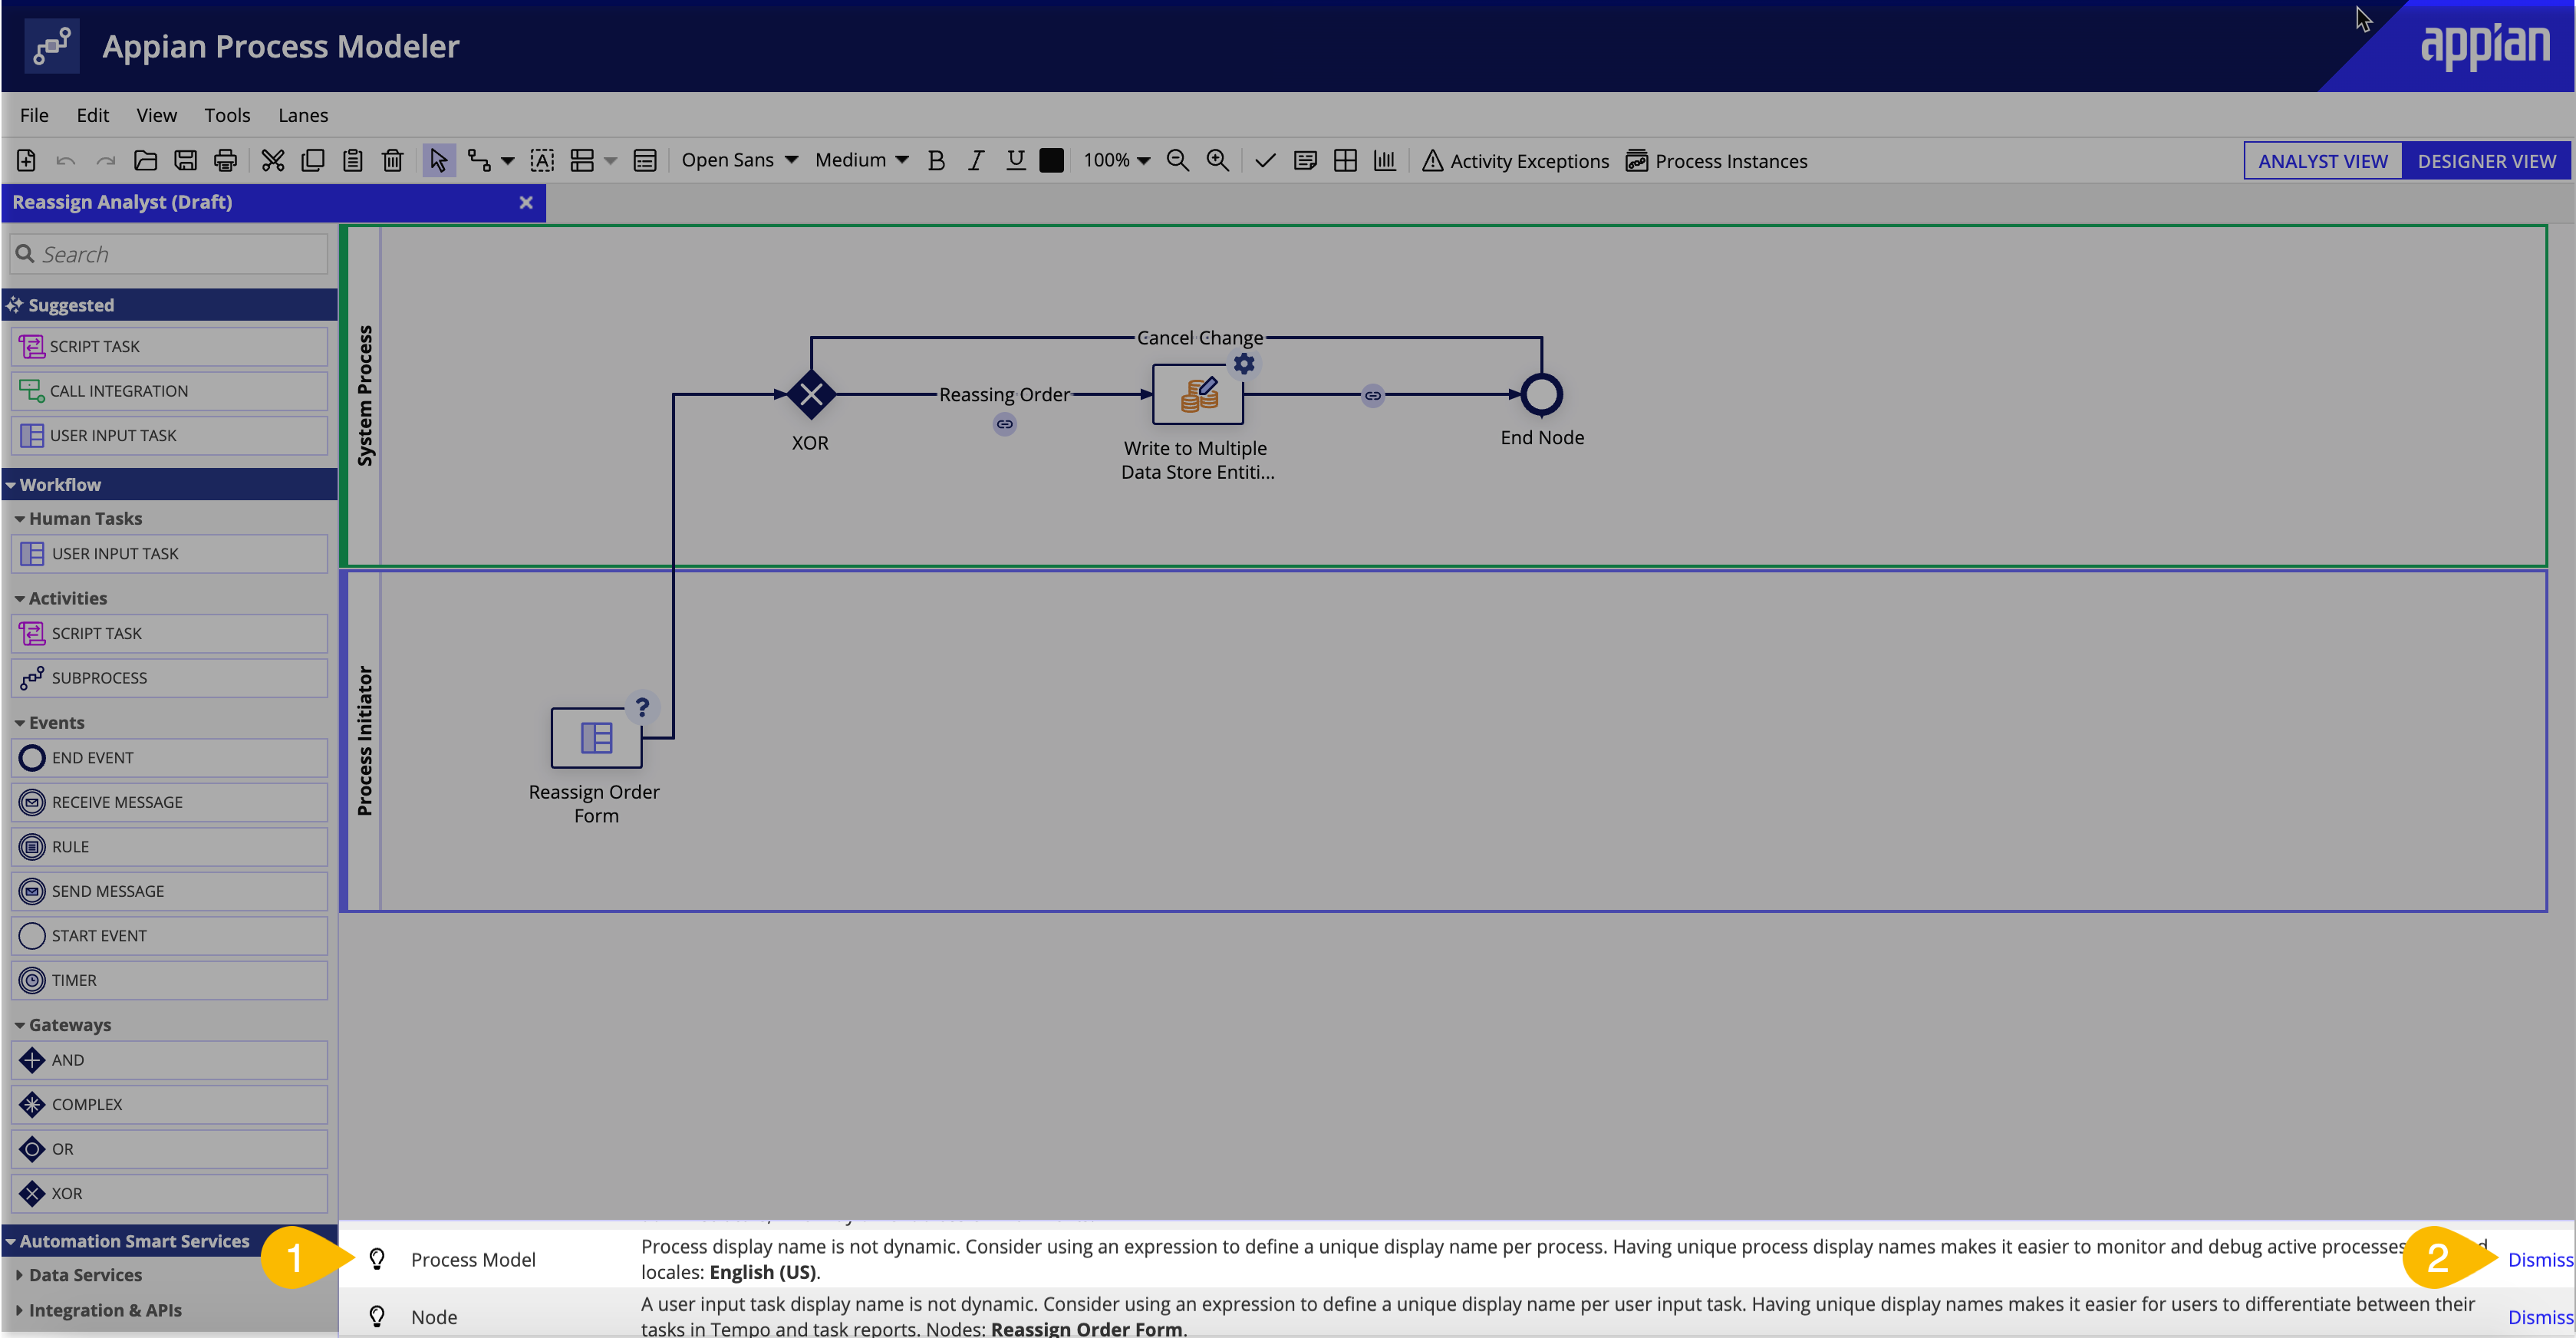 images/appian_recommendations_process_modeler_annotated.png